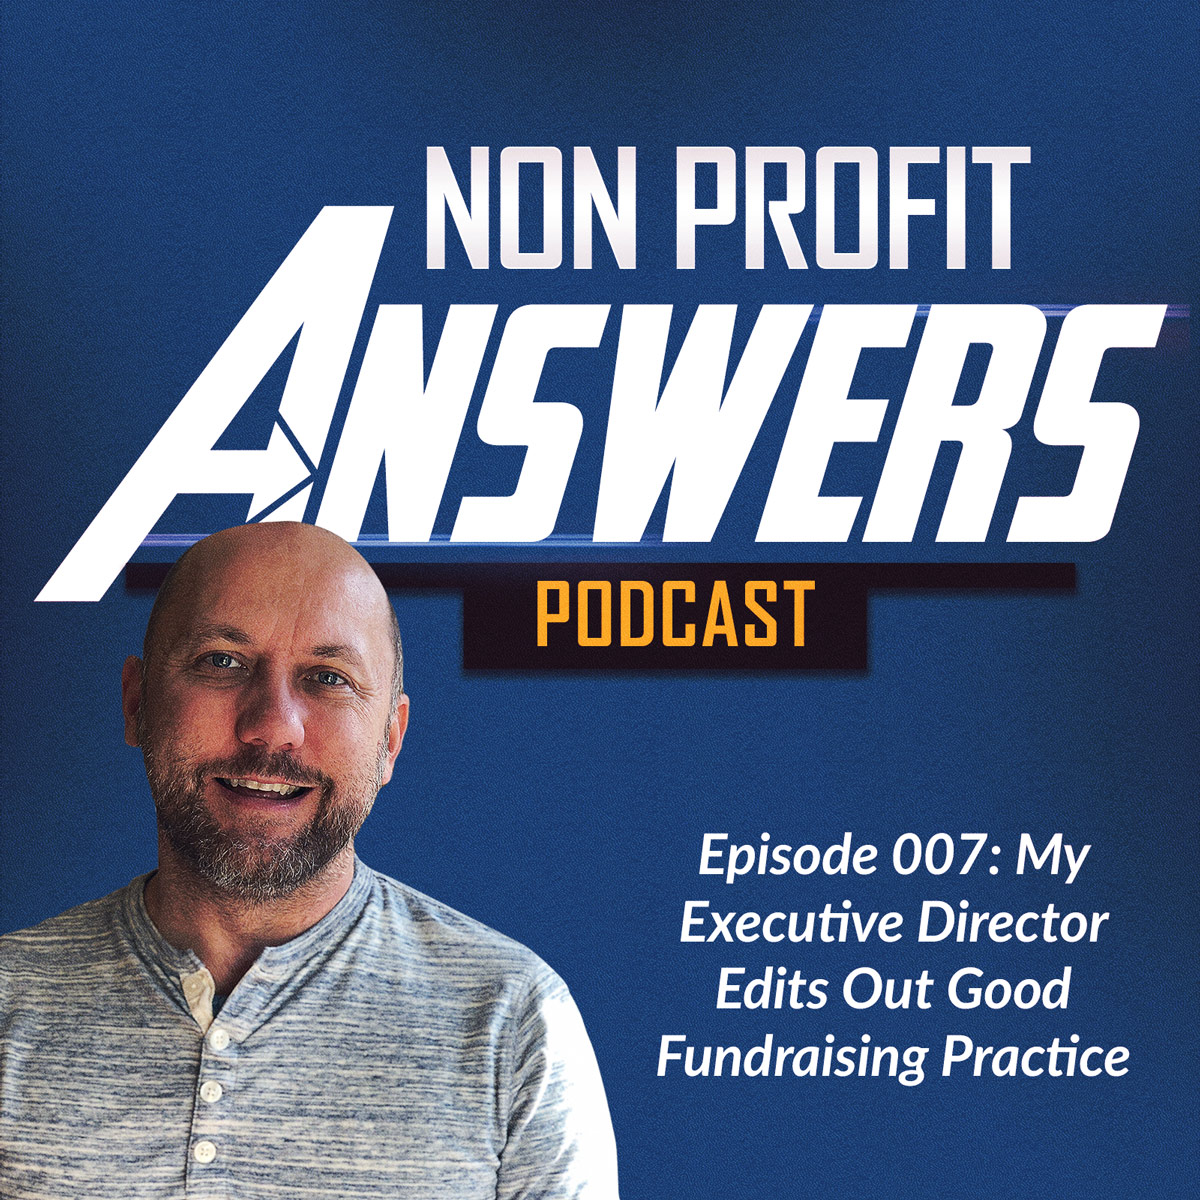 007 - My Executive Director Edits Out Good Fundraising Practice, What Should I Do?